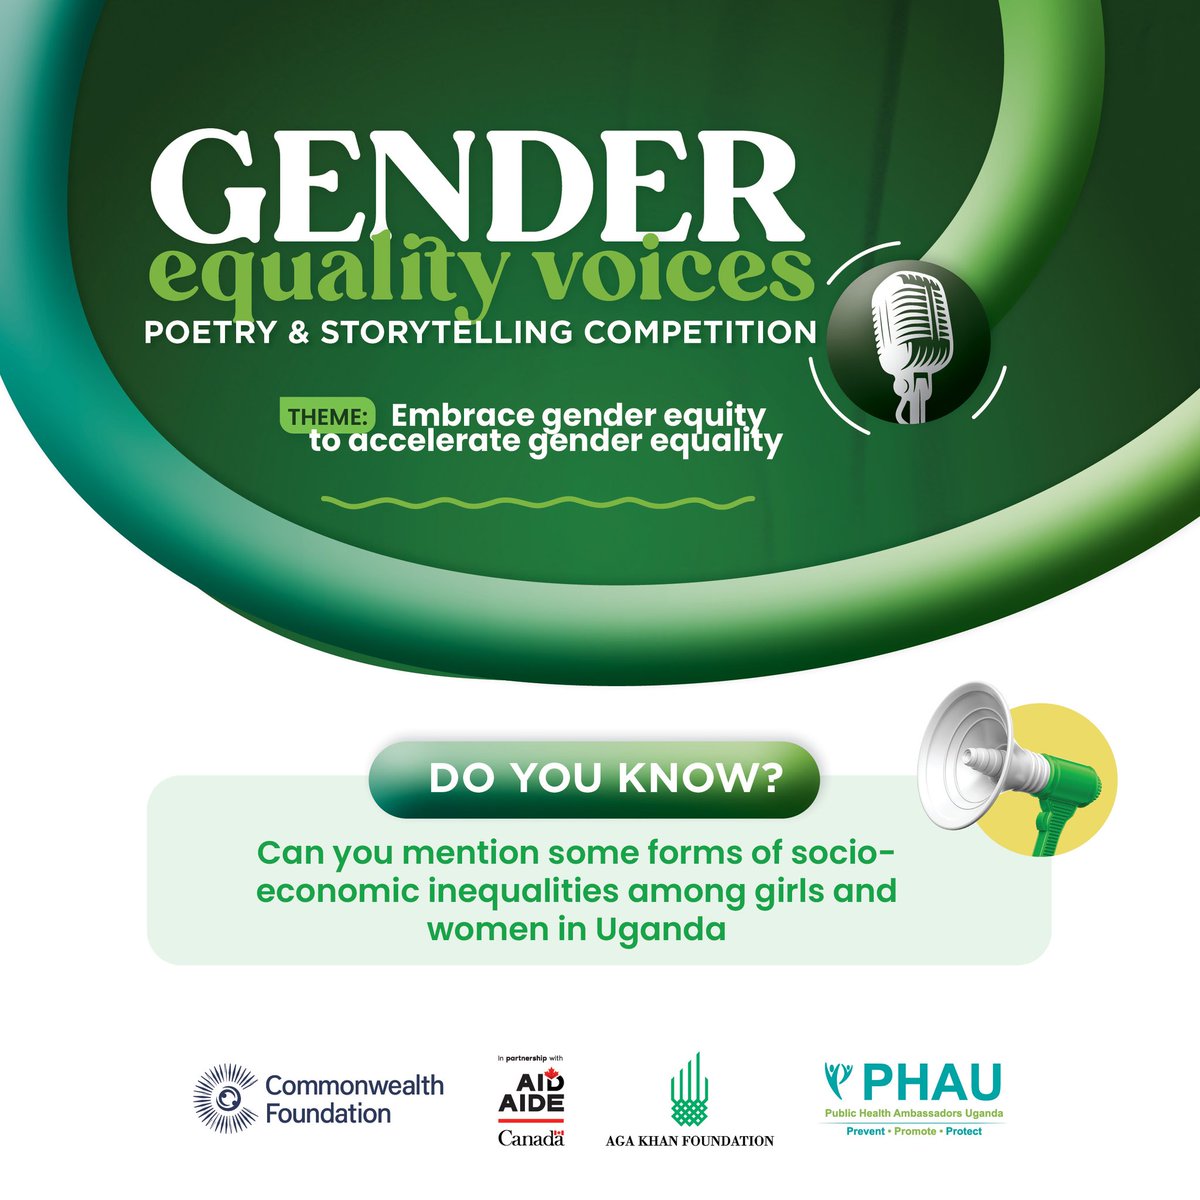 Here's a chance for your voice to be heard....let your story or poetry speak  Gender equality...let us know how deep this rabbit hole goes for you. Whats your story?
#EmbraceEquity #PHAUCARES
#Accelerateequality
#Lethershine